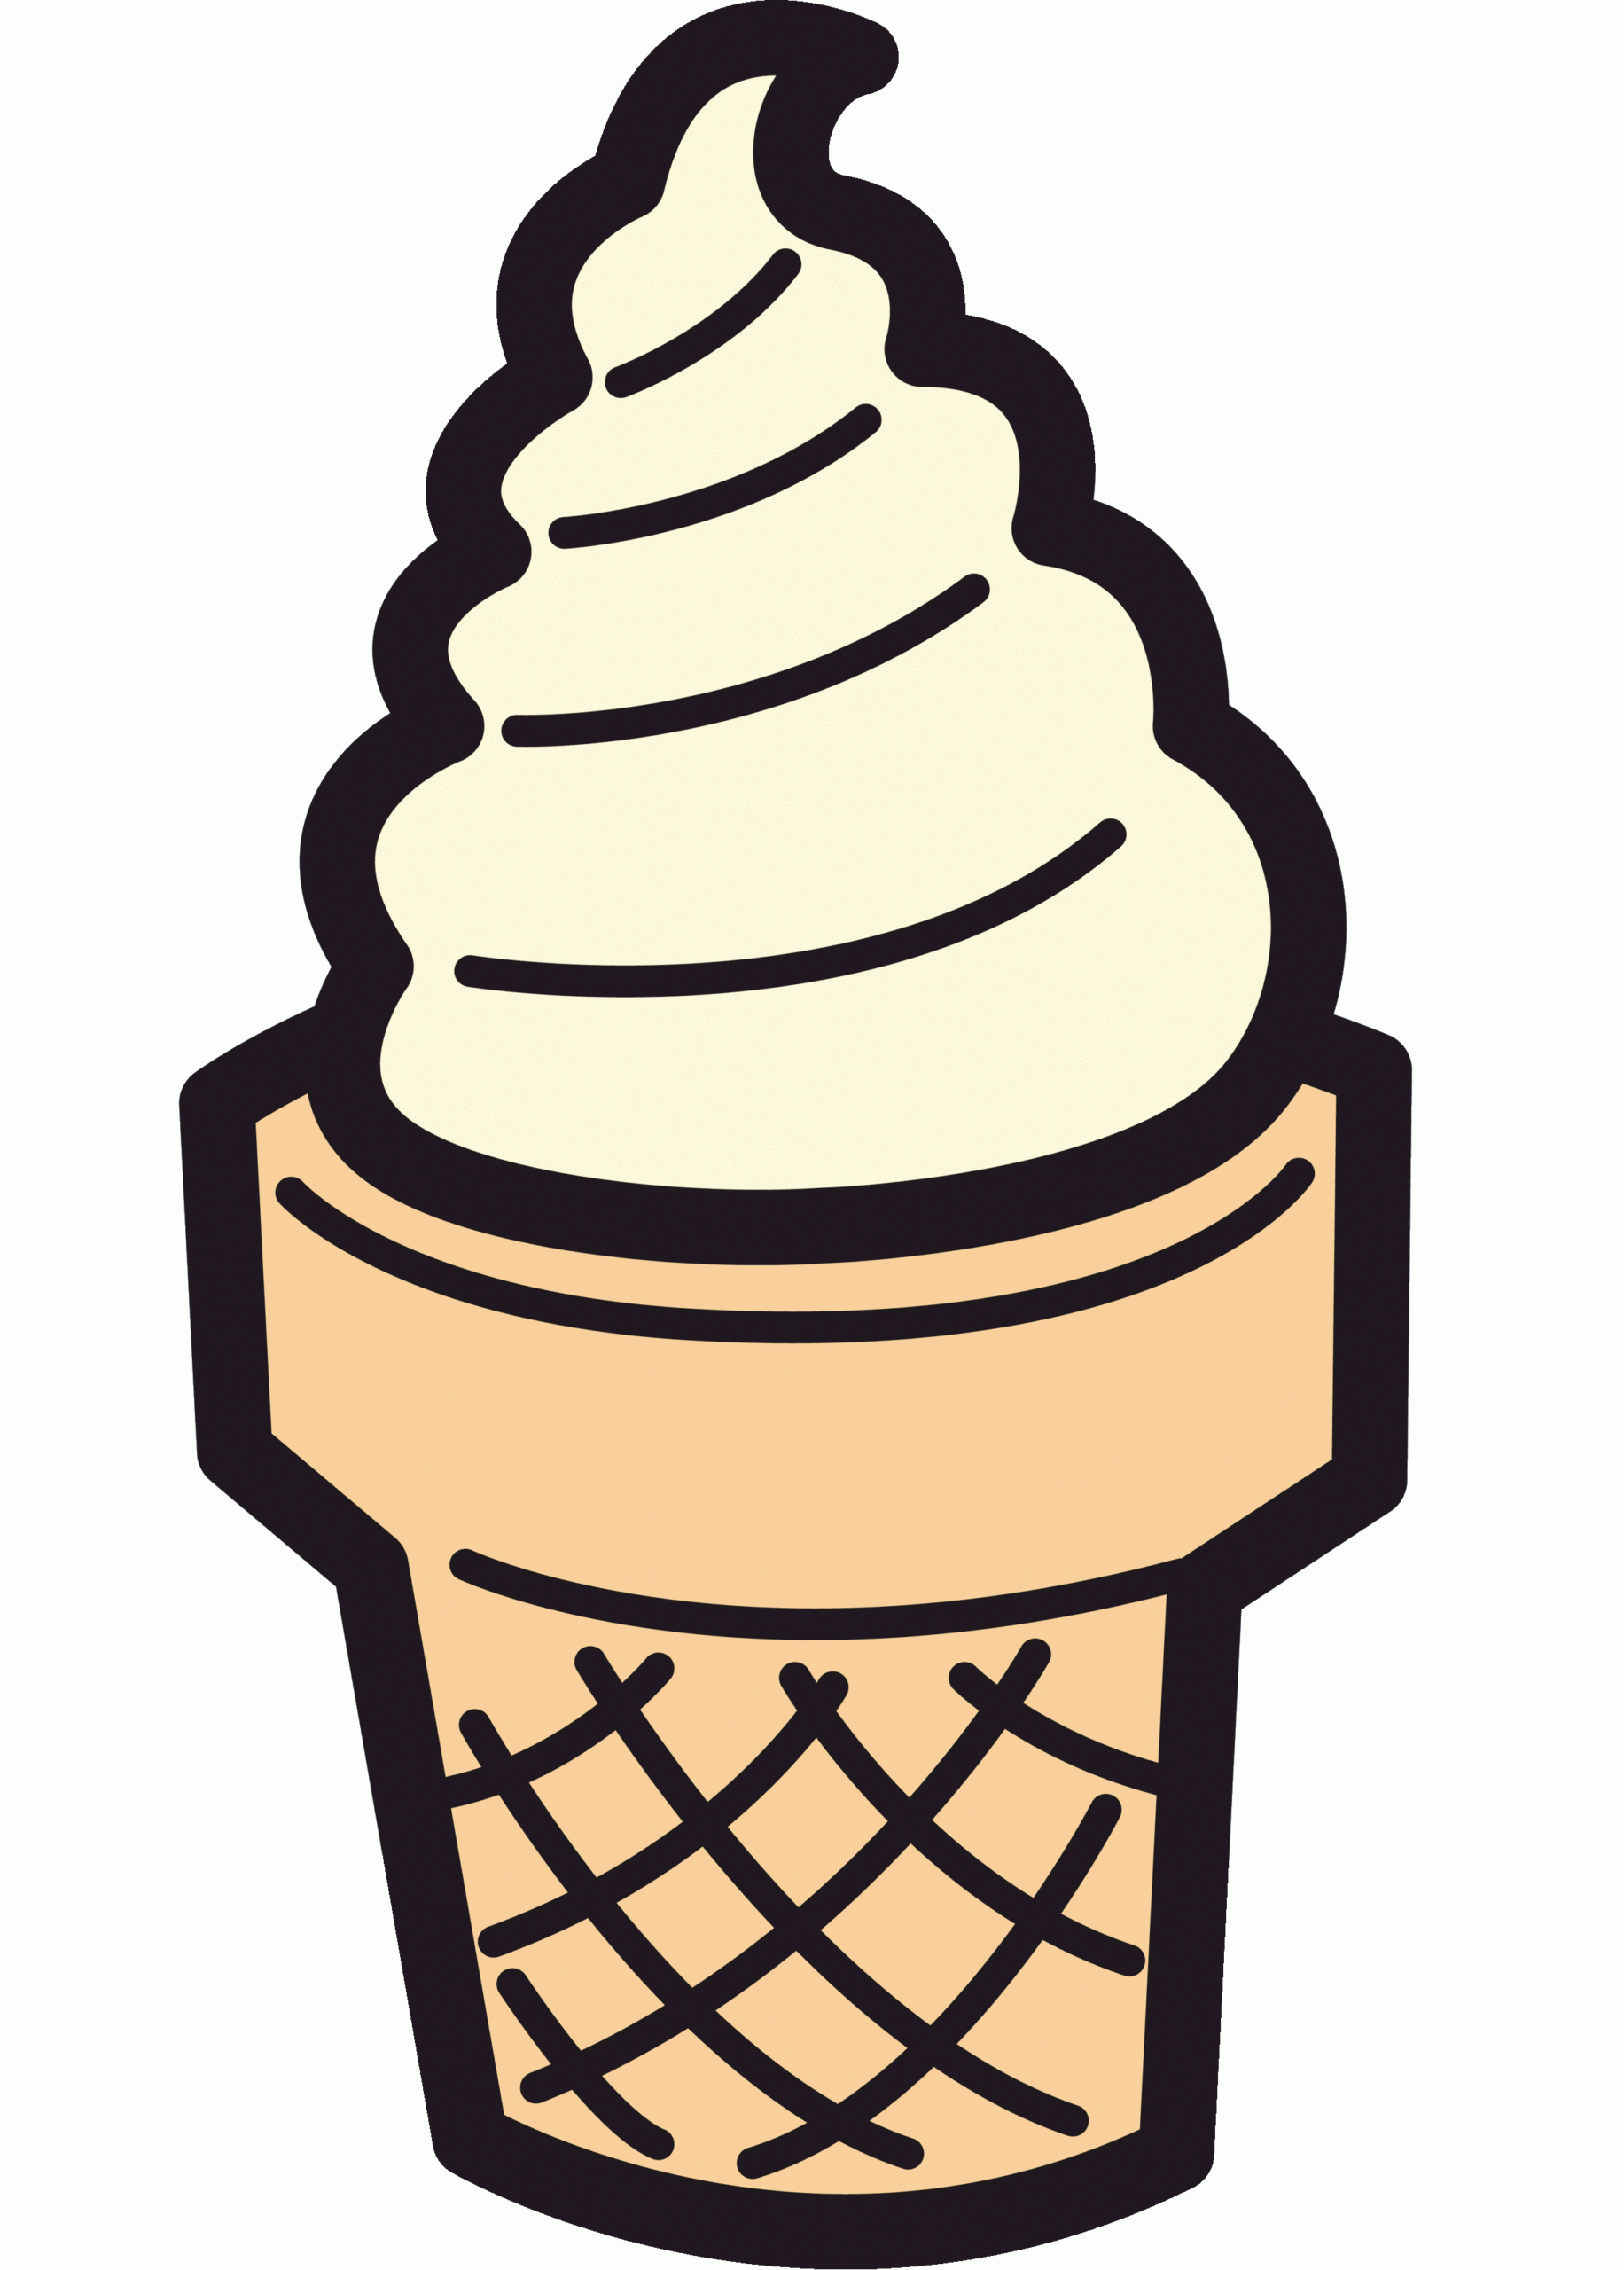 Best Cool Ice Cream Cone Clipart Images 11510 Clipartion